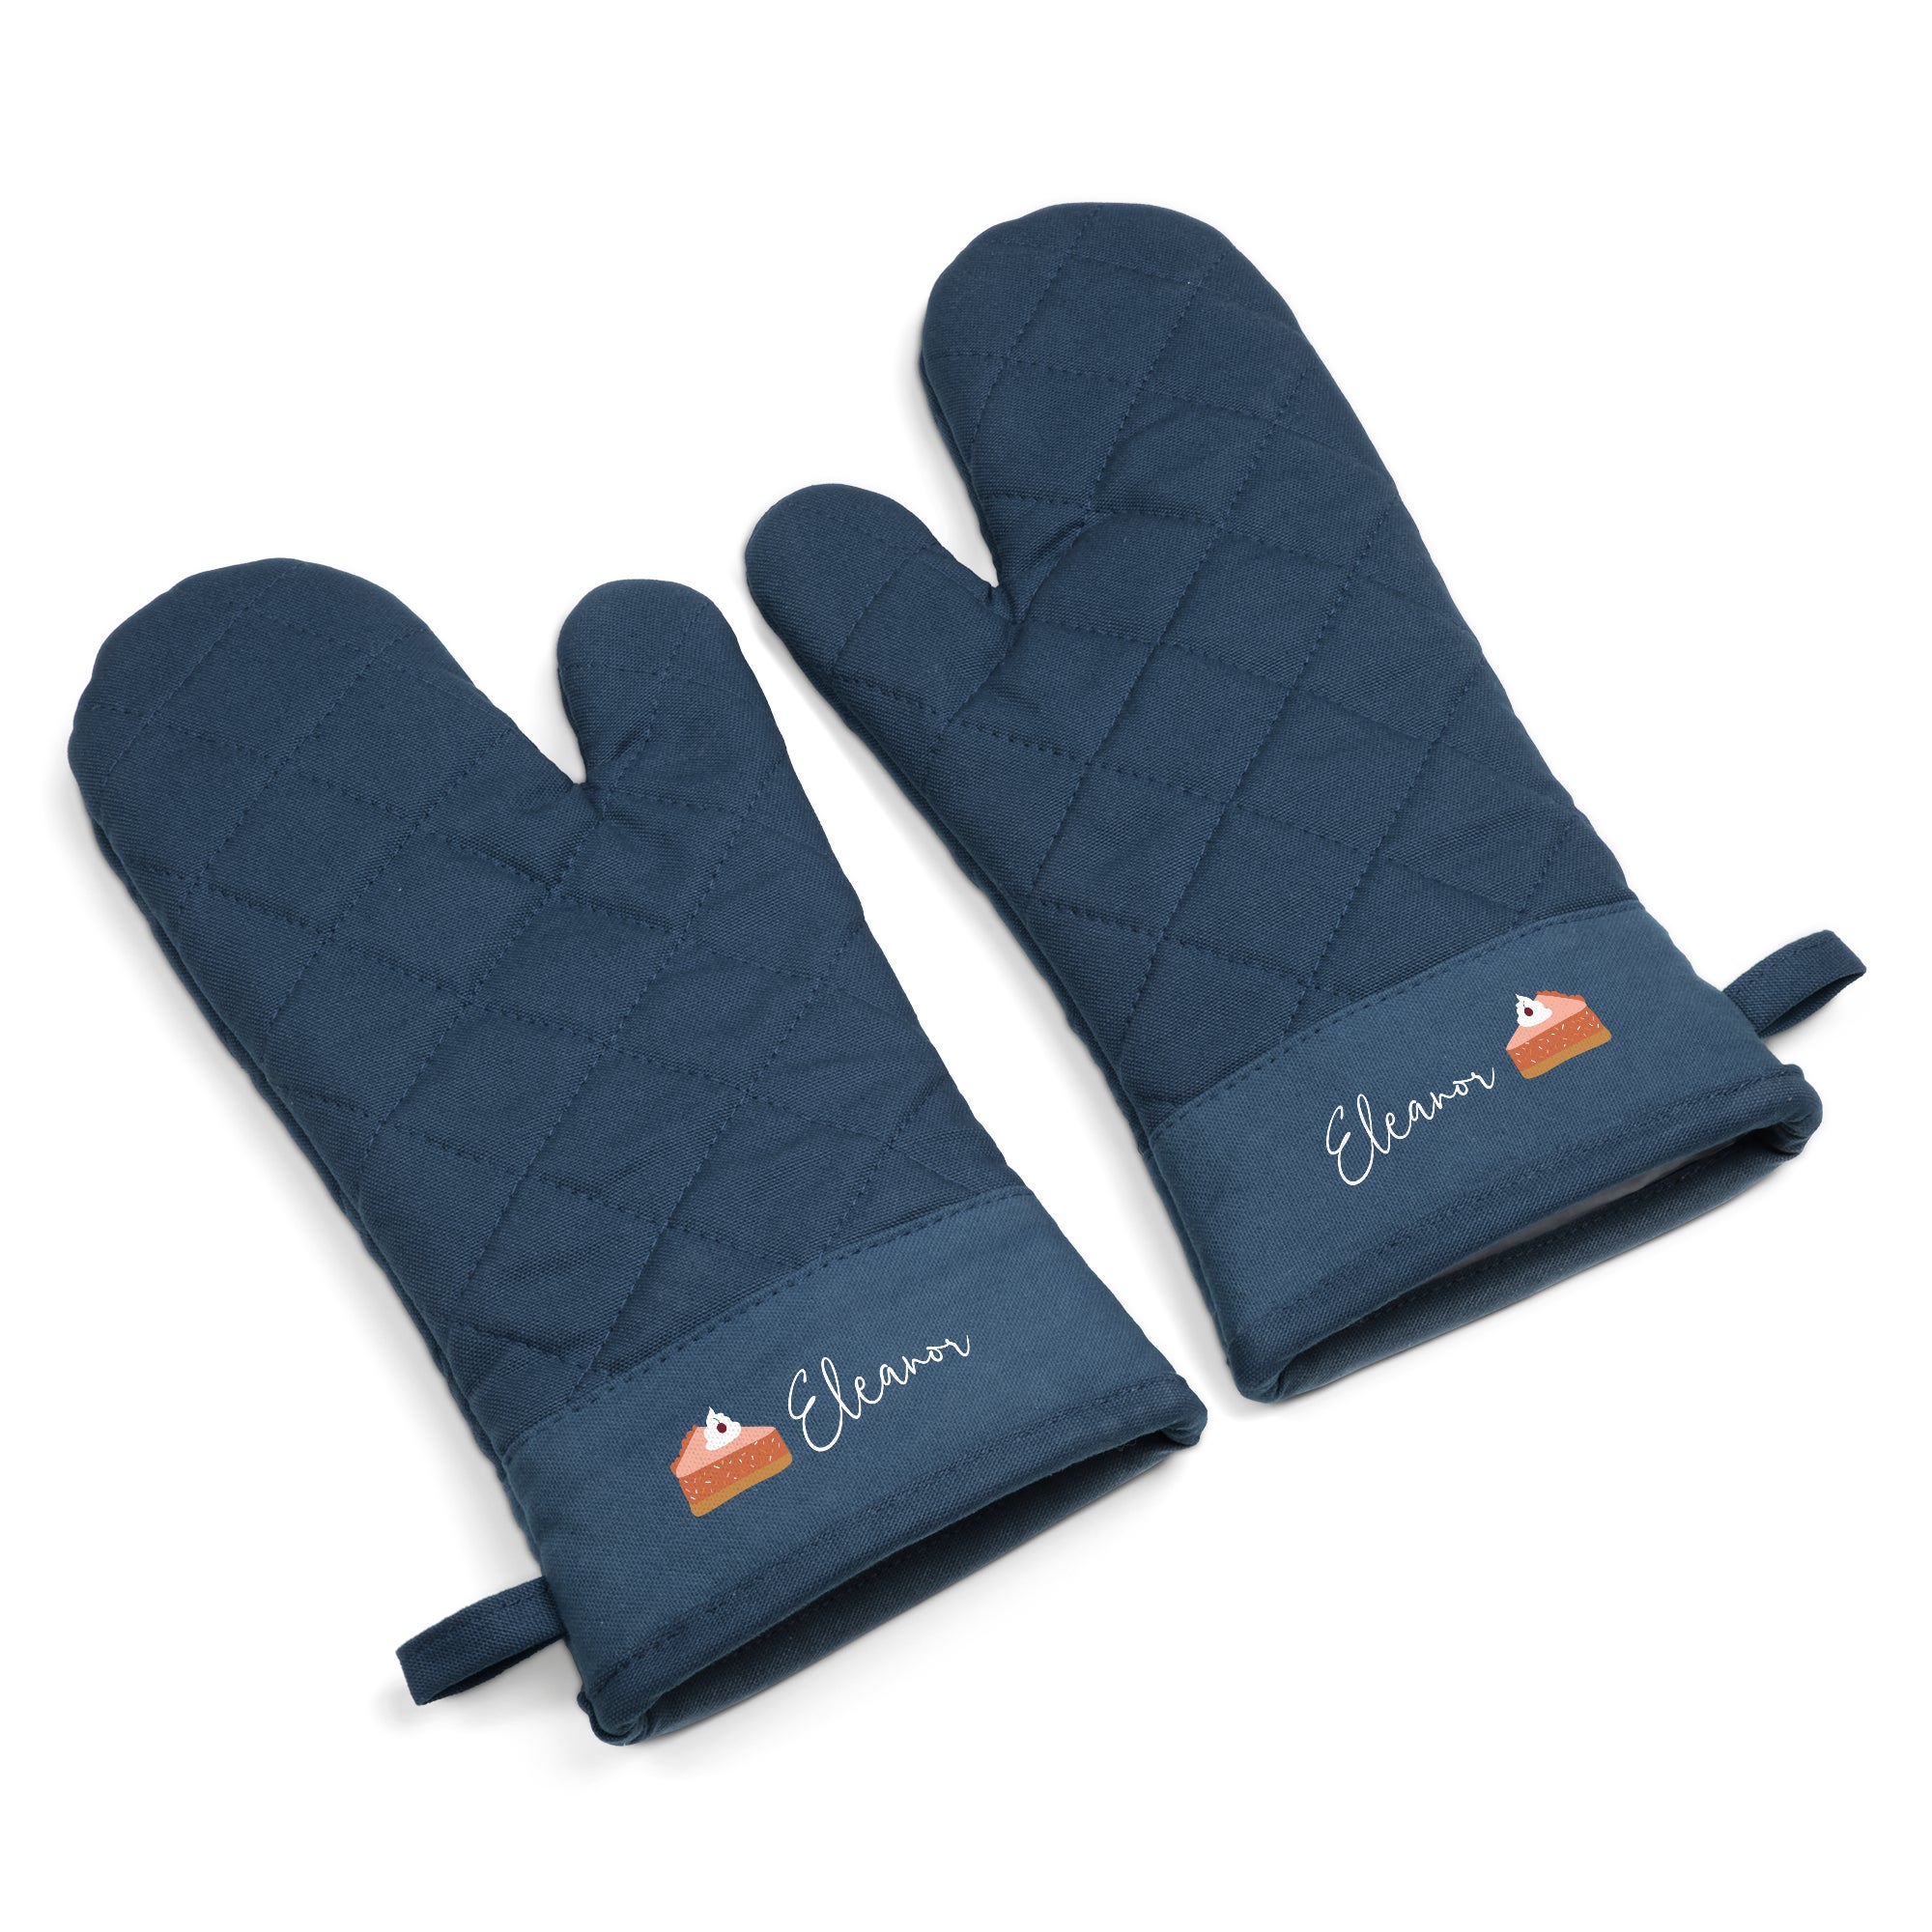 Personalised oven gloves - 2 pcs - Blue